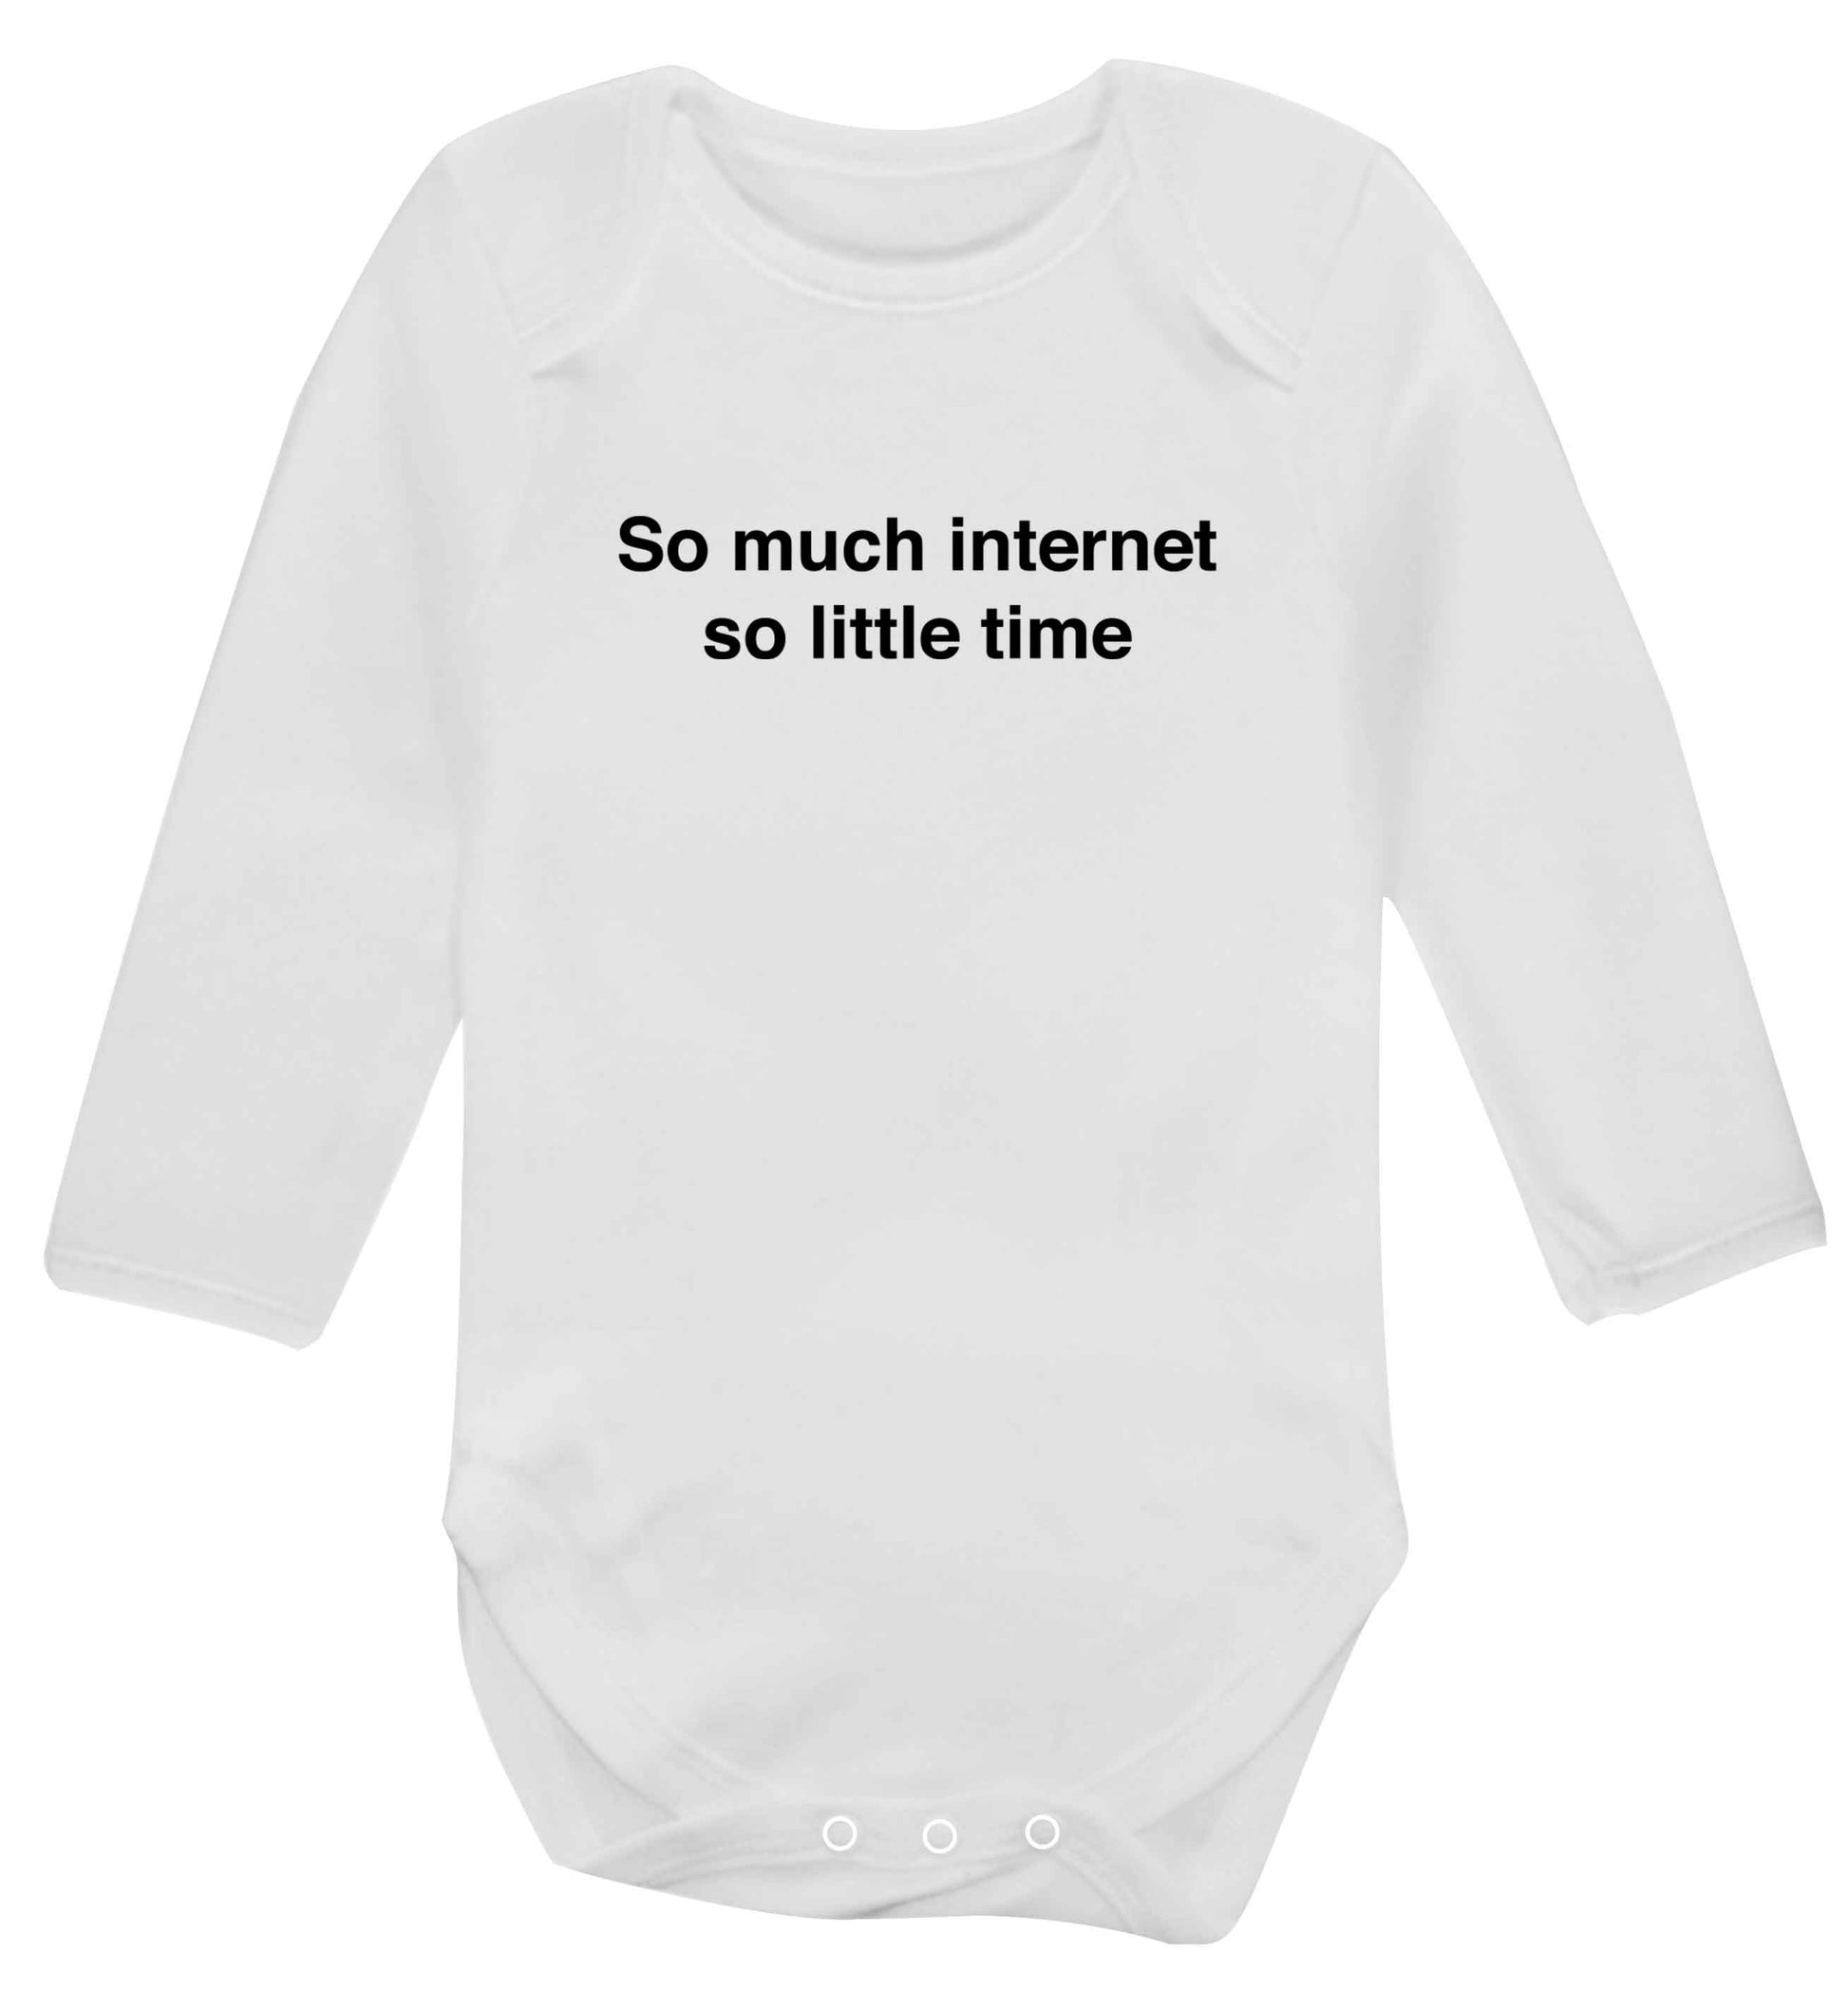 So much internet so little time baby vest long sleeved white 6-12 months